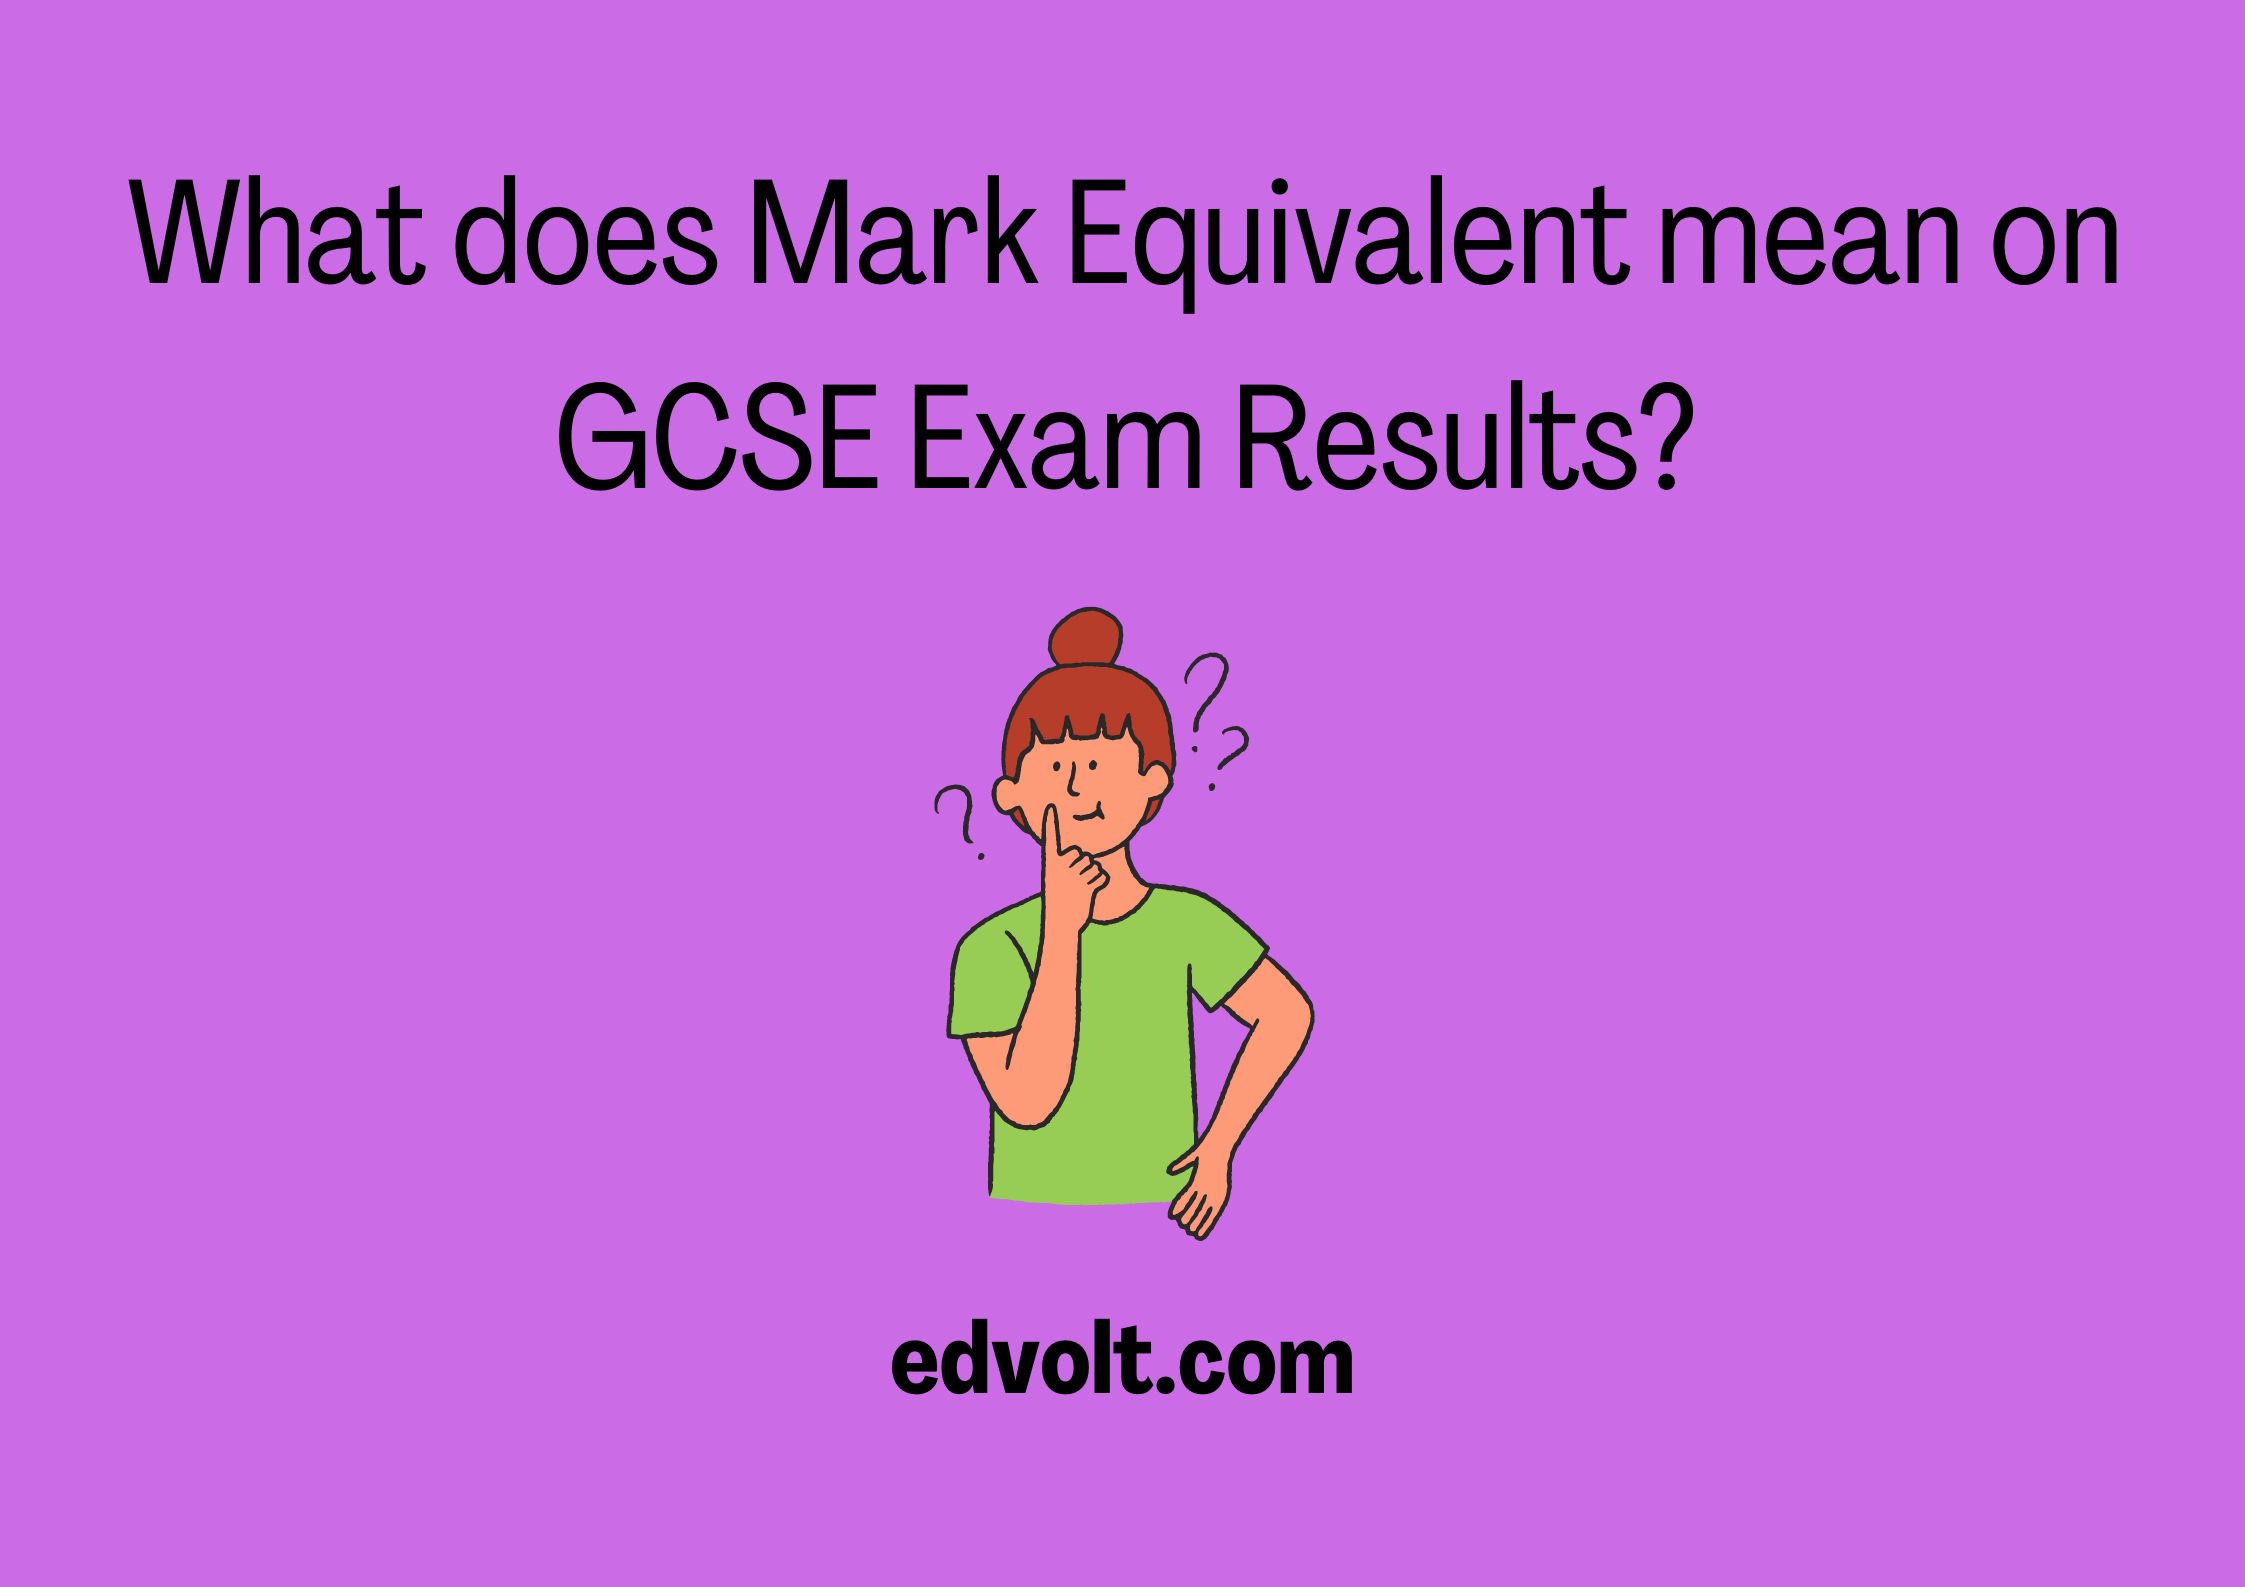 What does Mark Equivalent mean on GCSE Exam Results?